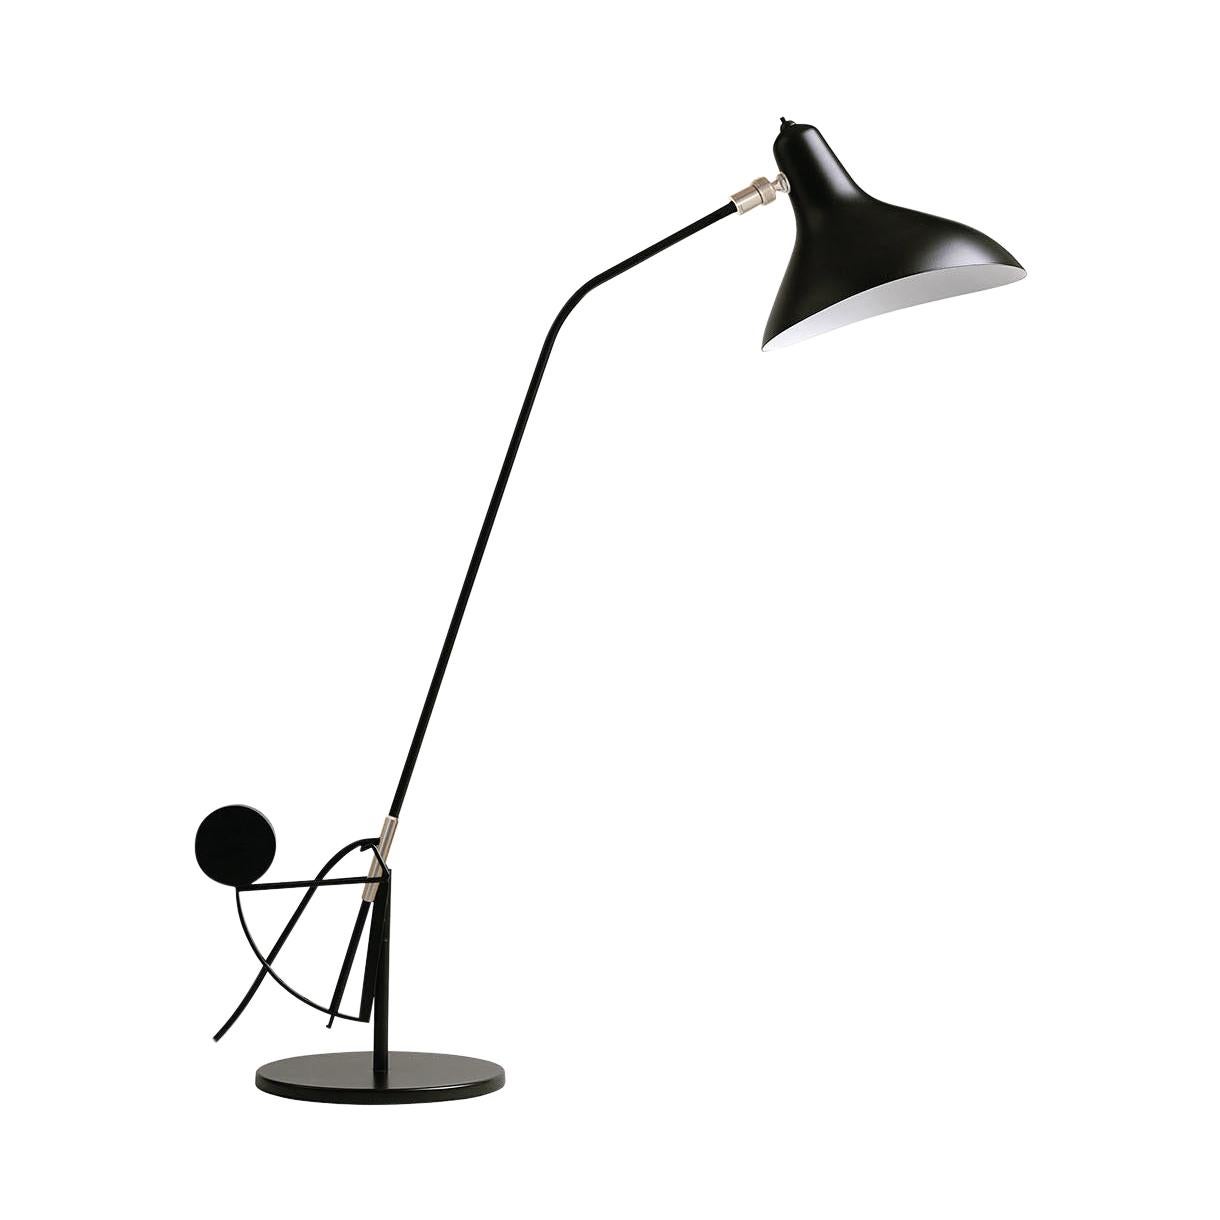 Mantis BS3 Table Lamp Designed in 1951 by B. Schottlander as a Tribute to Calder For Sale